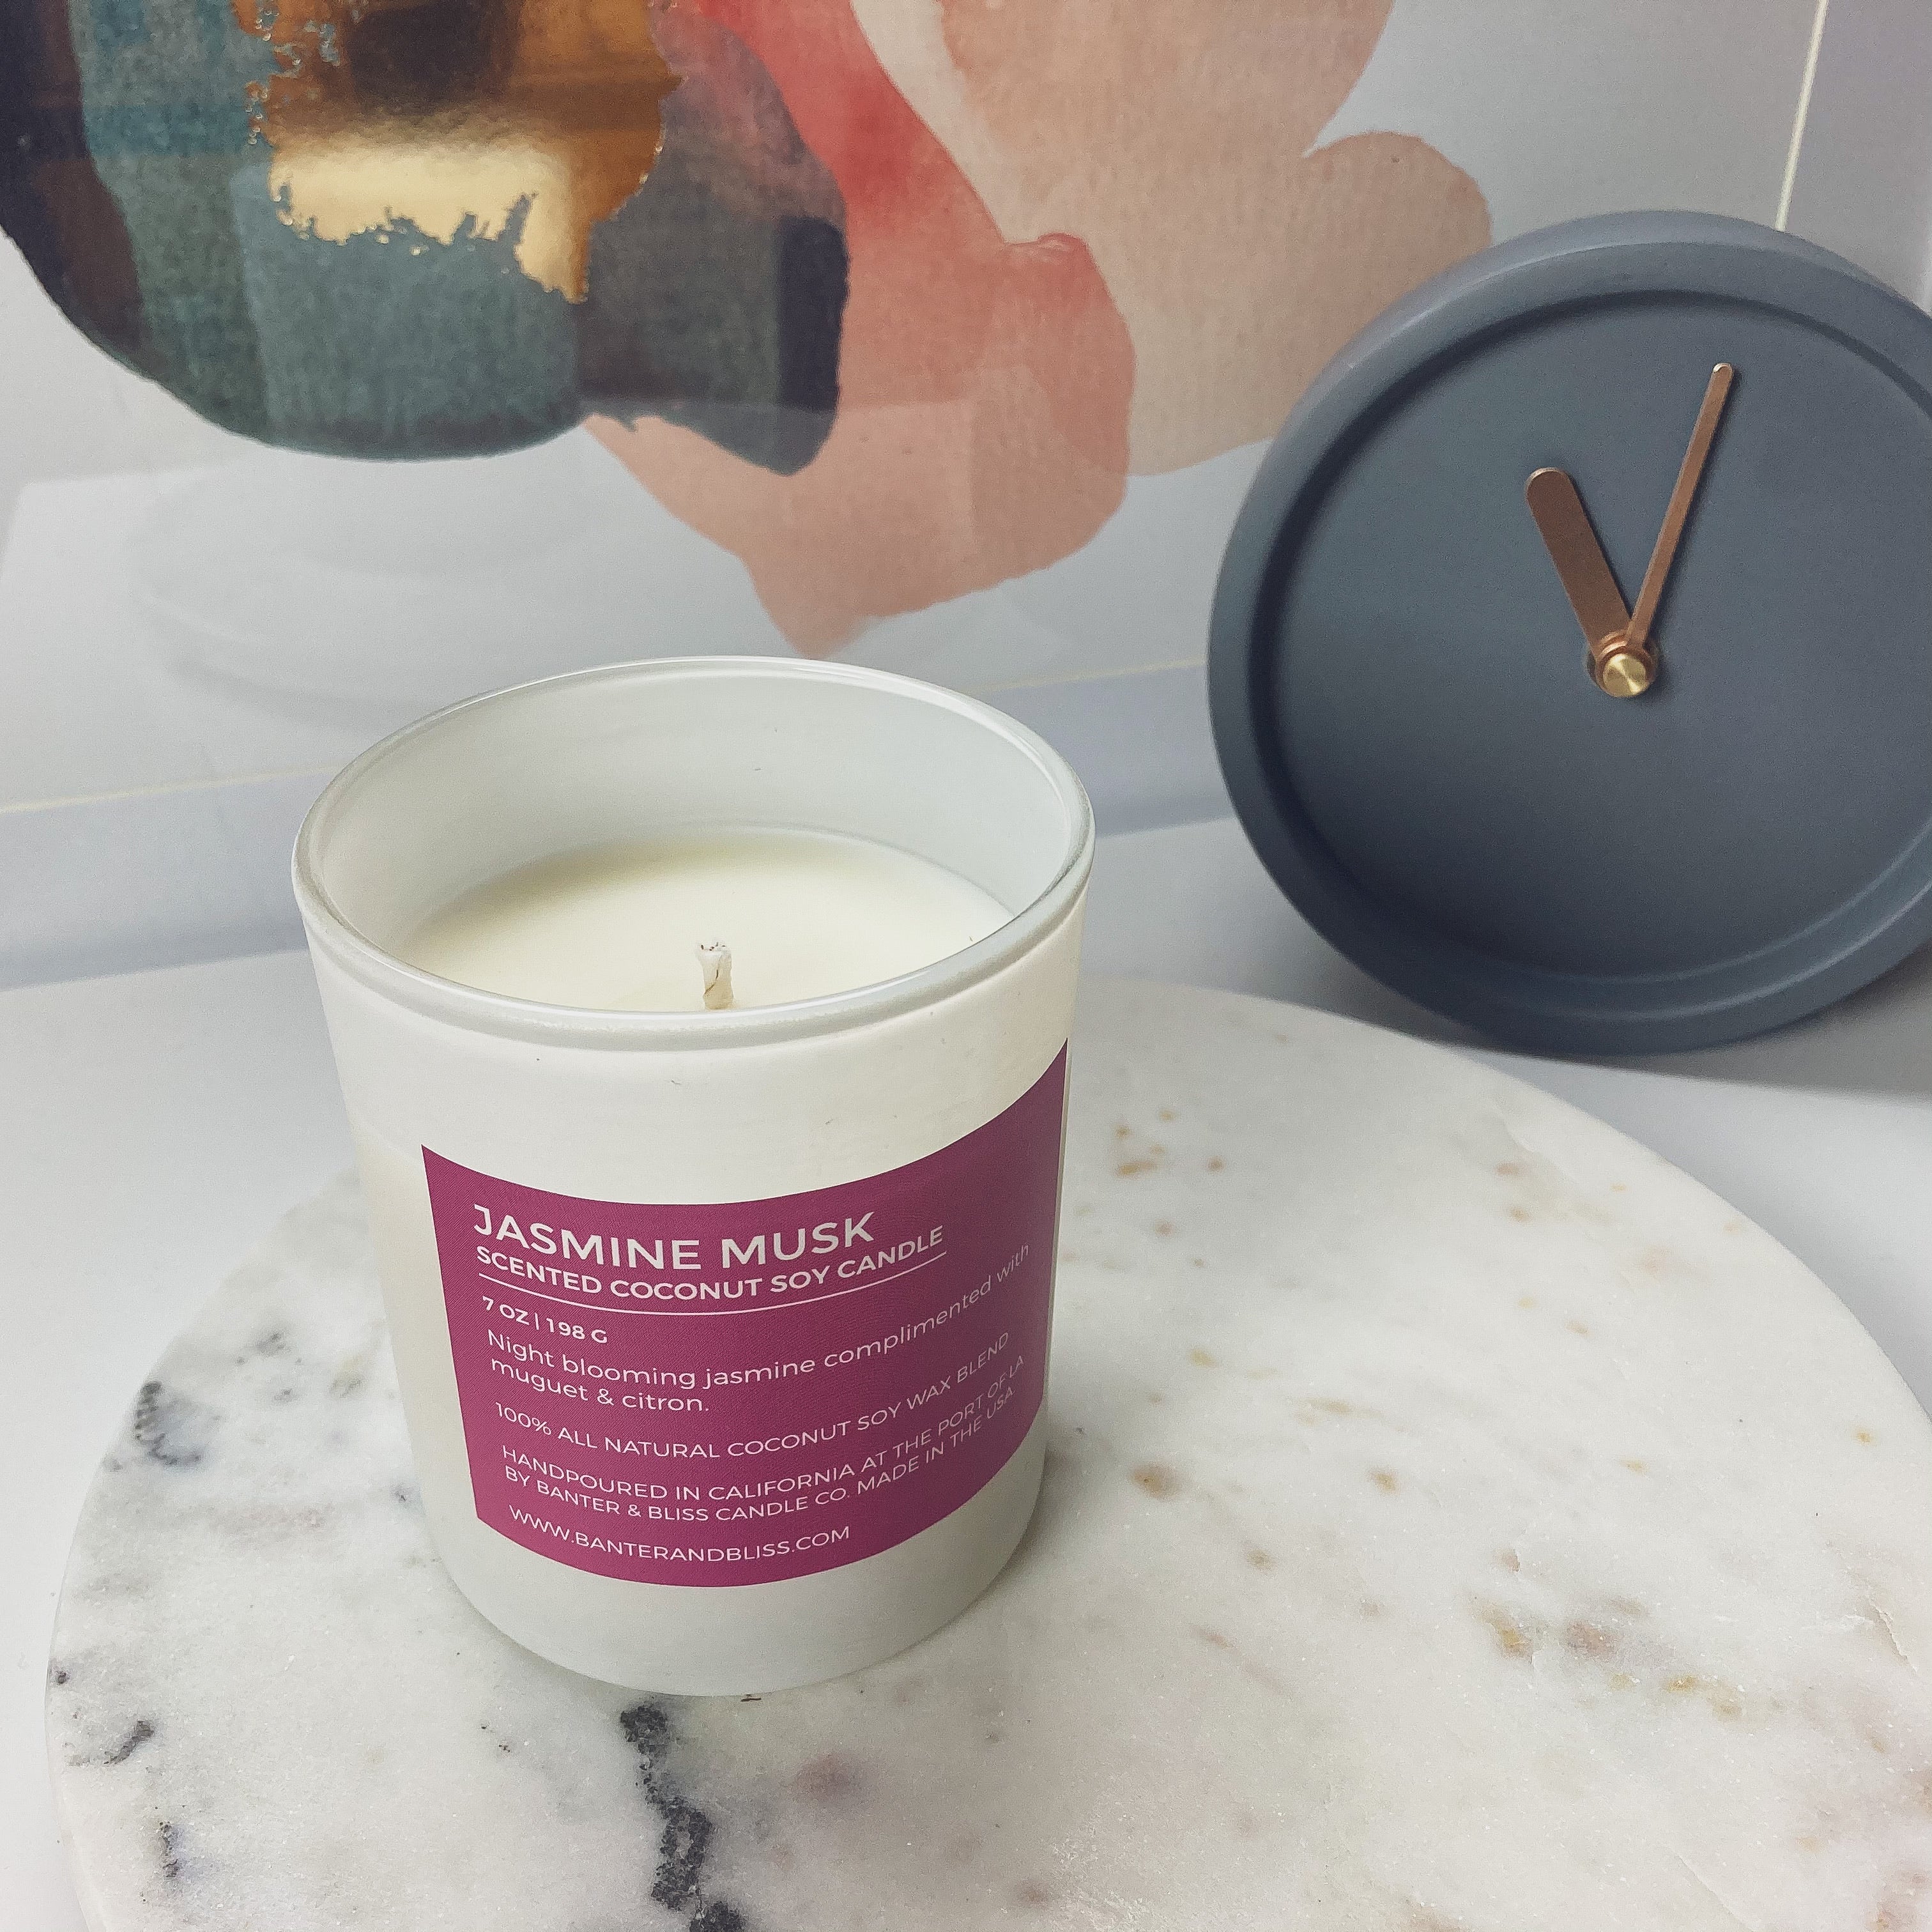 Jasmine Musk. 7 oz. Scented Coconut Soy Candle.